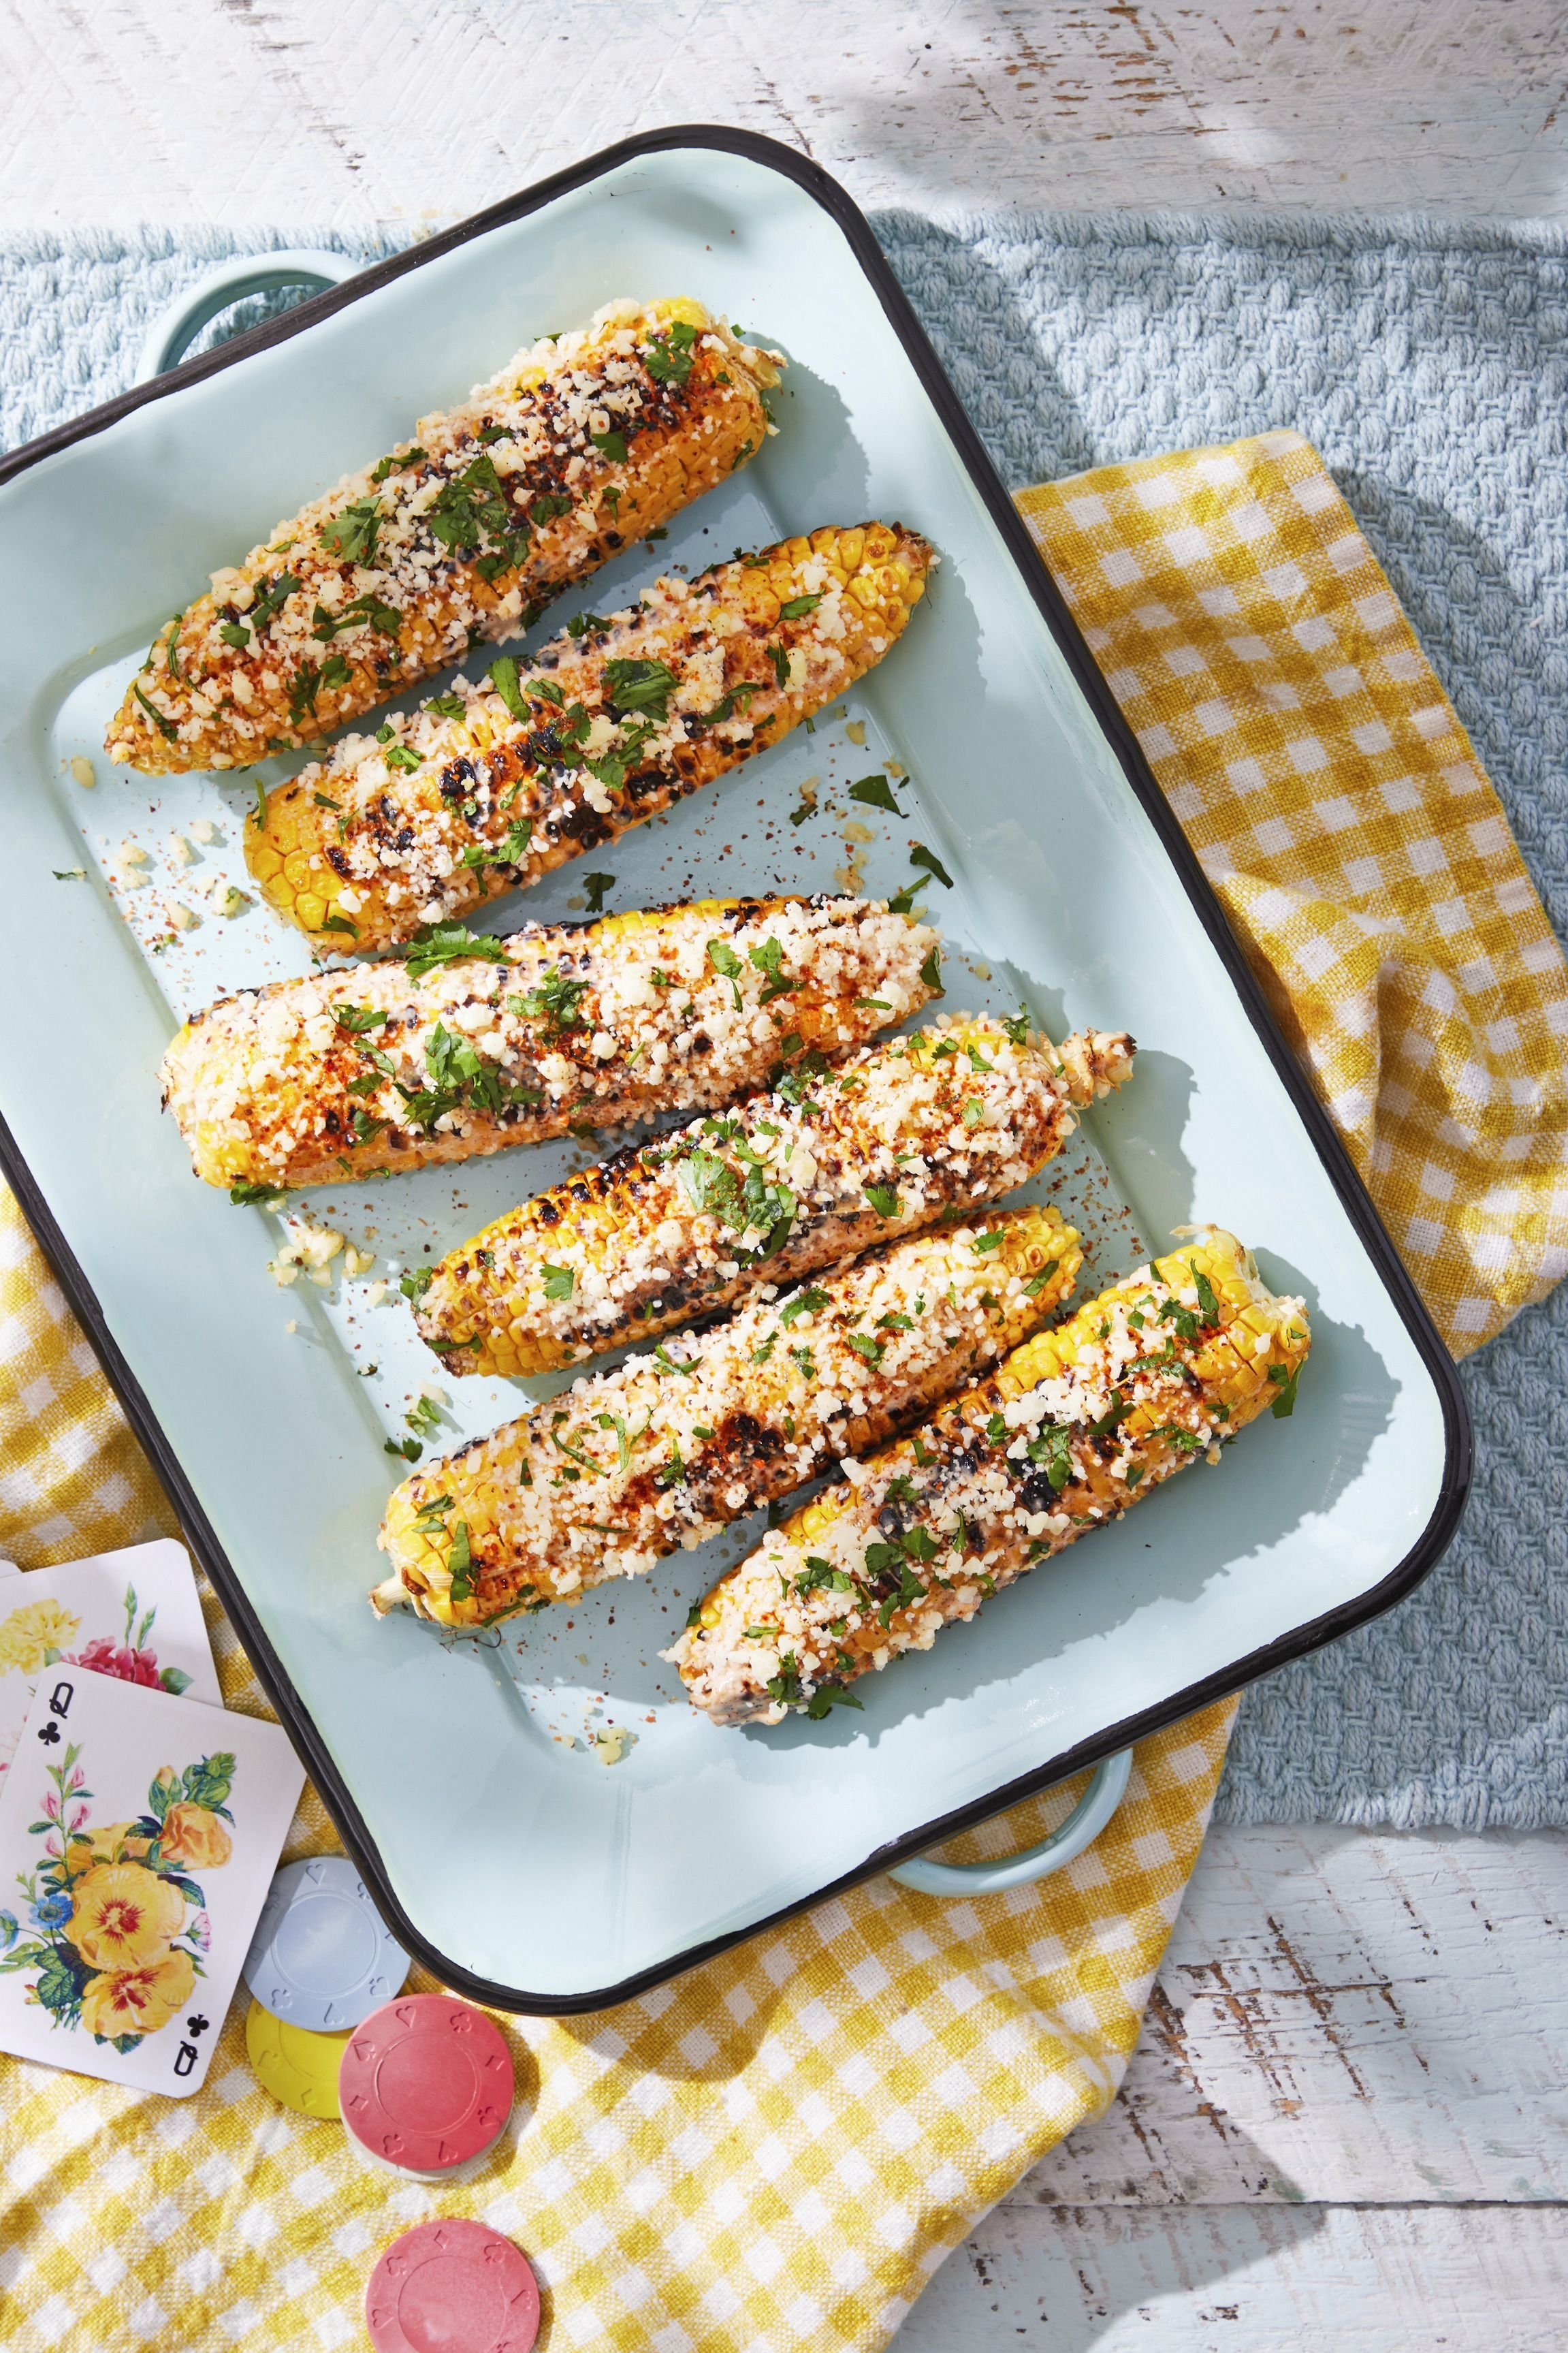 12 Must-Have Grilling Accessories for Delish Summer Meals - Organic  Authority